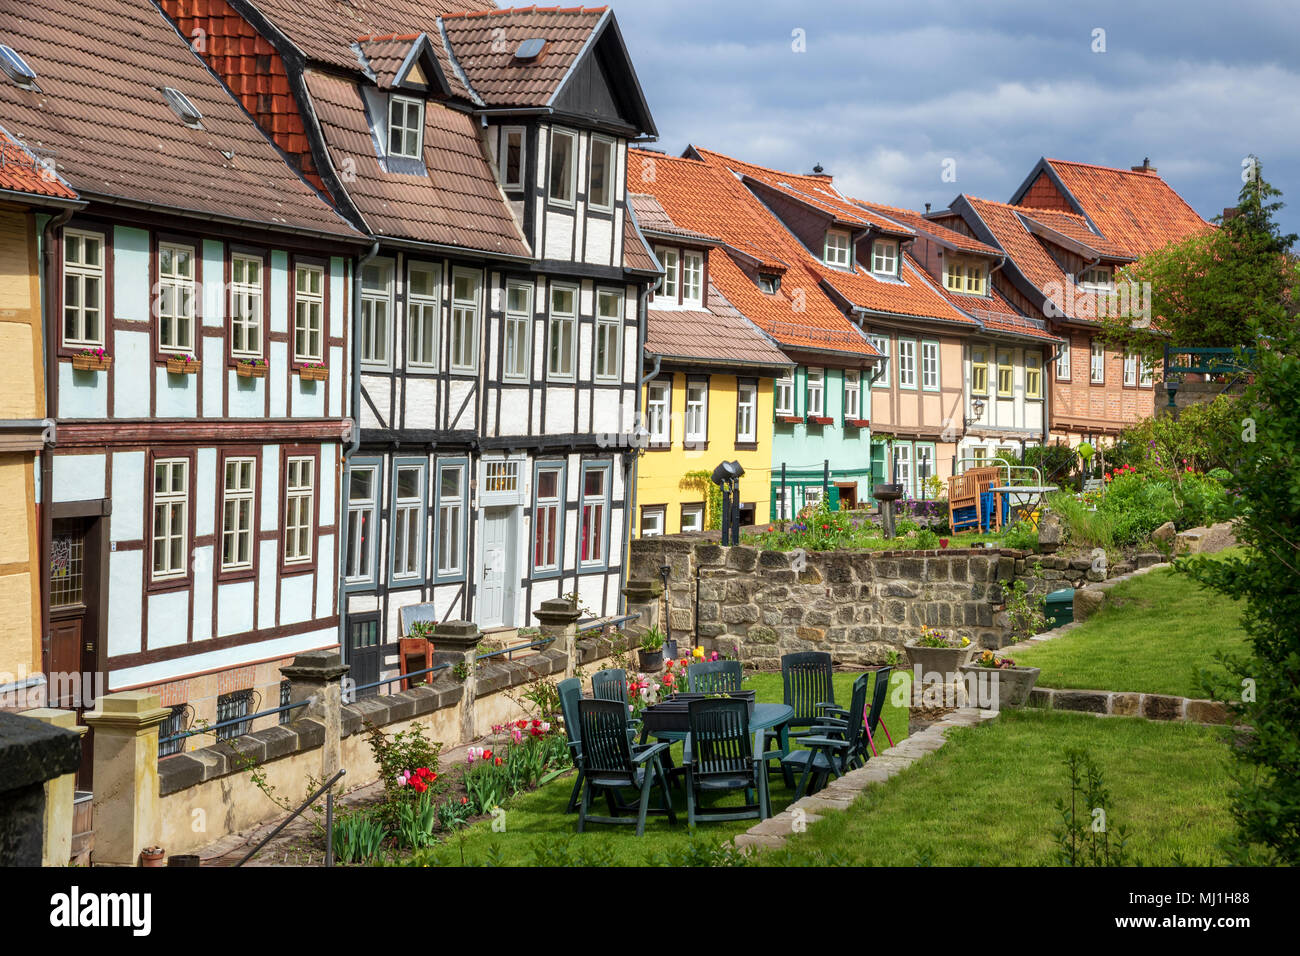 Historic timber frame houses in the medieval town Quedlinburg, North of the Harz mountains. Saxony-Anhalt, Germany Stock Photo